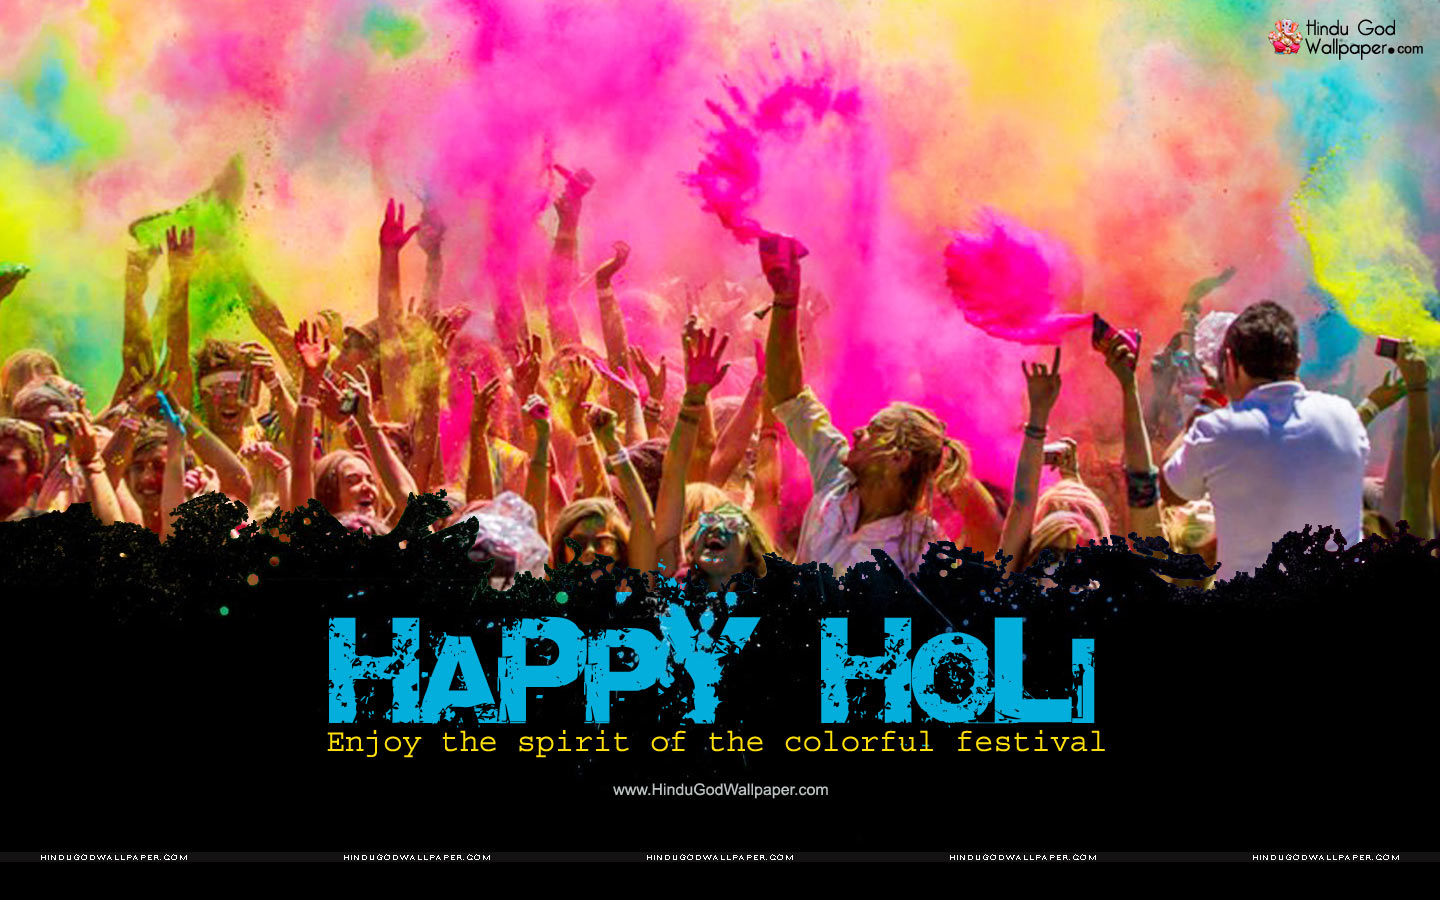 Holi Wishes 2021 Send these wishes images photos greetings and messages  to friends and family